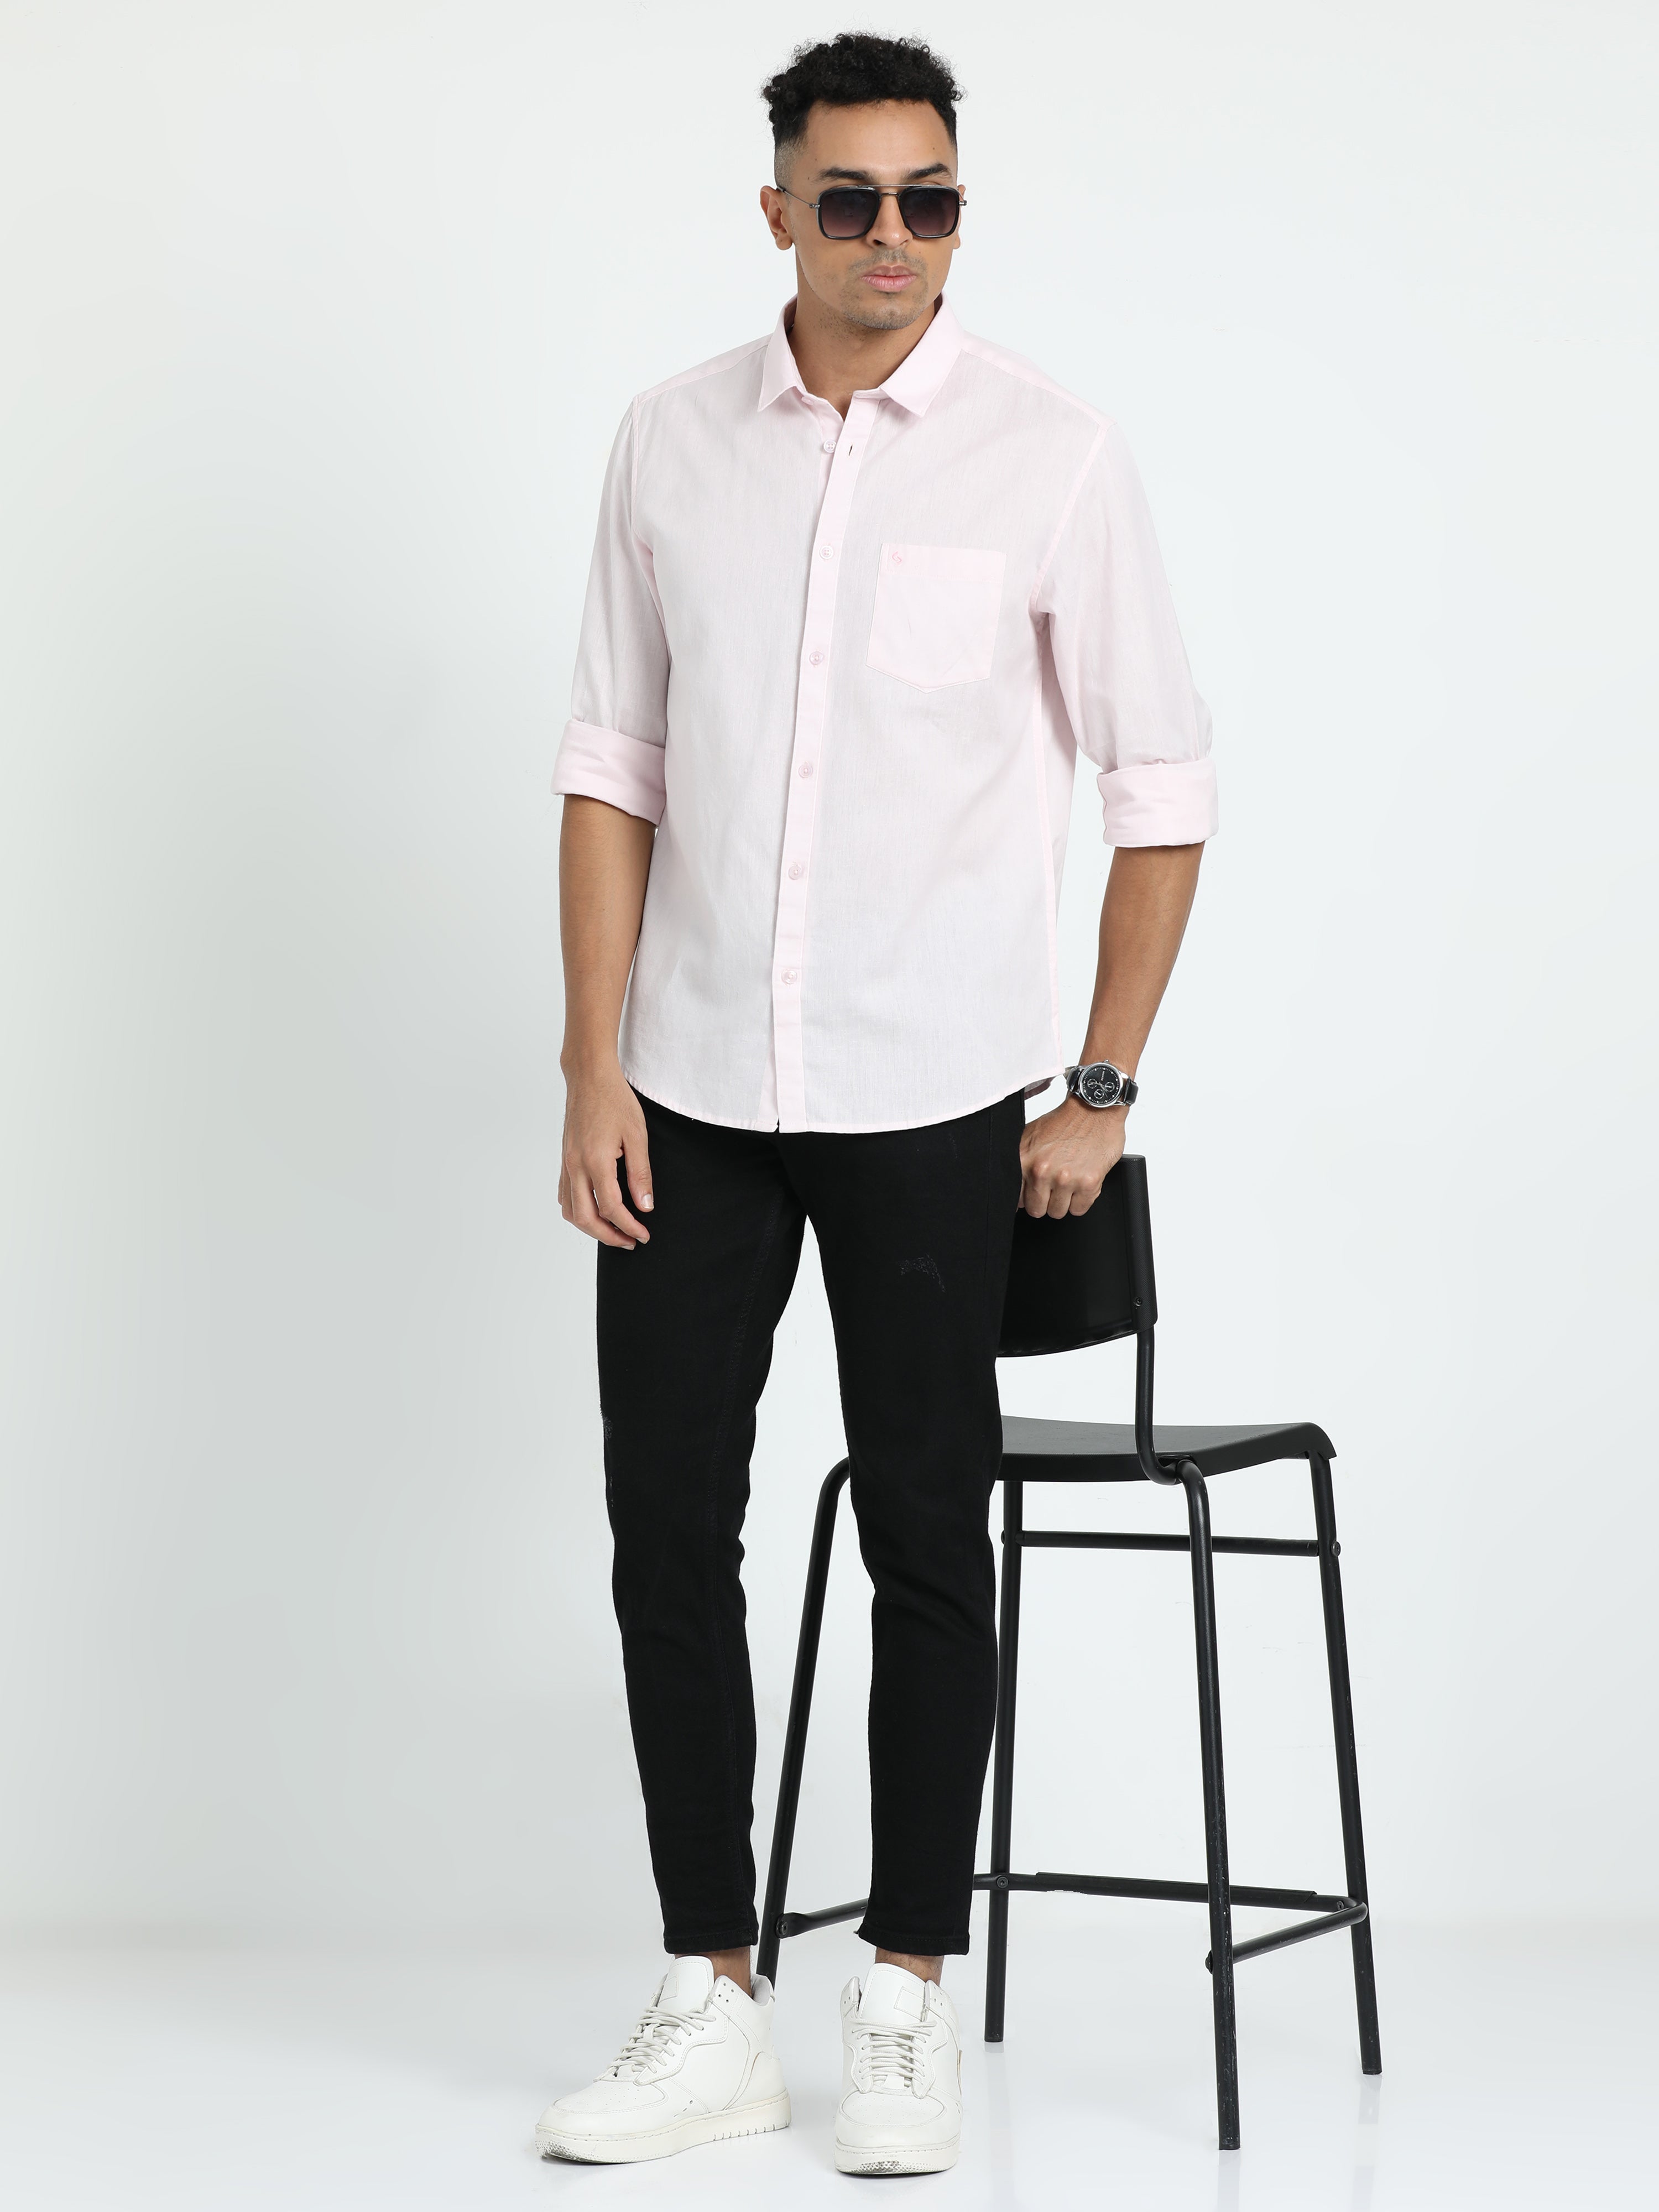 Classic Polo Men's Solid Pink Cotton Linen Full Sleeve Woven Shirt | DAMASK-PINK-SF-FS